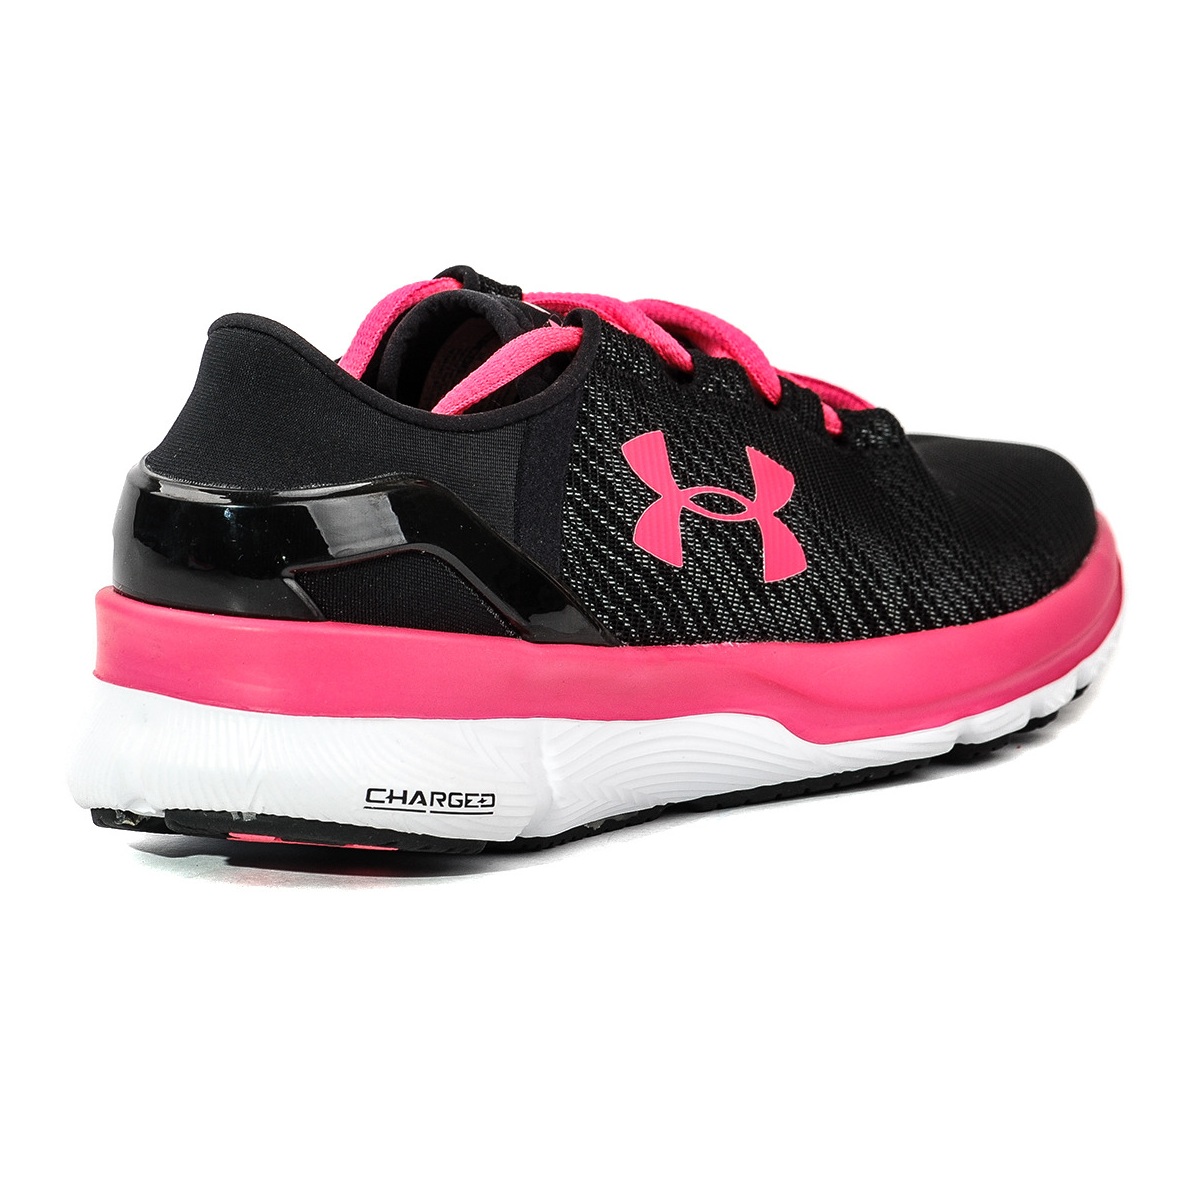 Fitness Shoes -  under armour SpeedForm Turbulence 9792